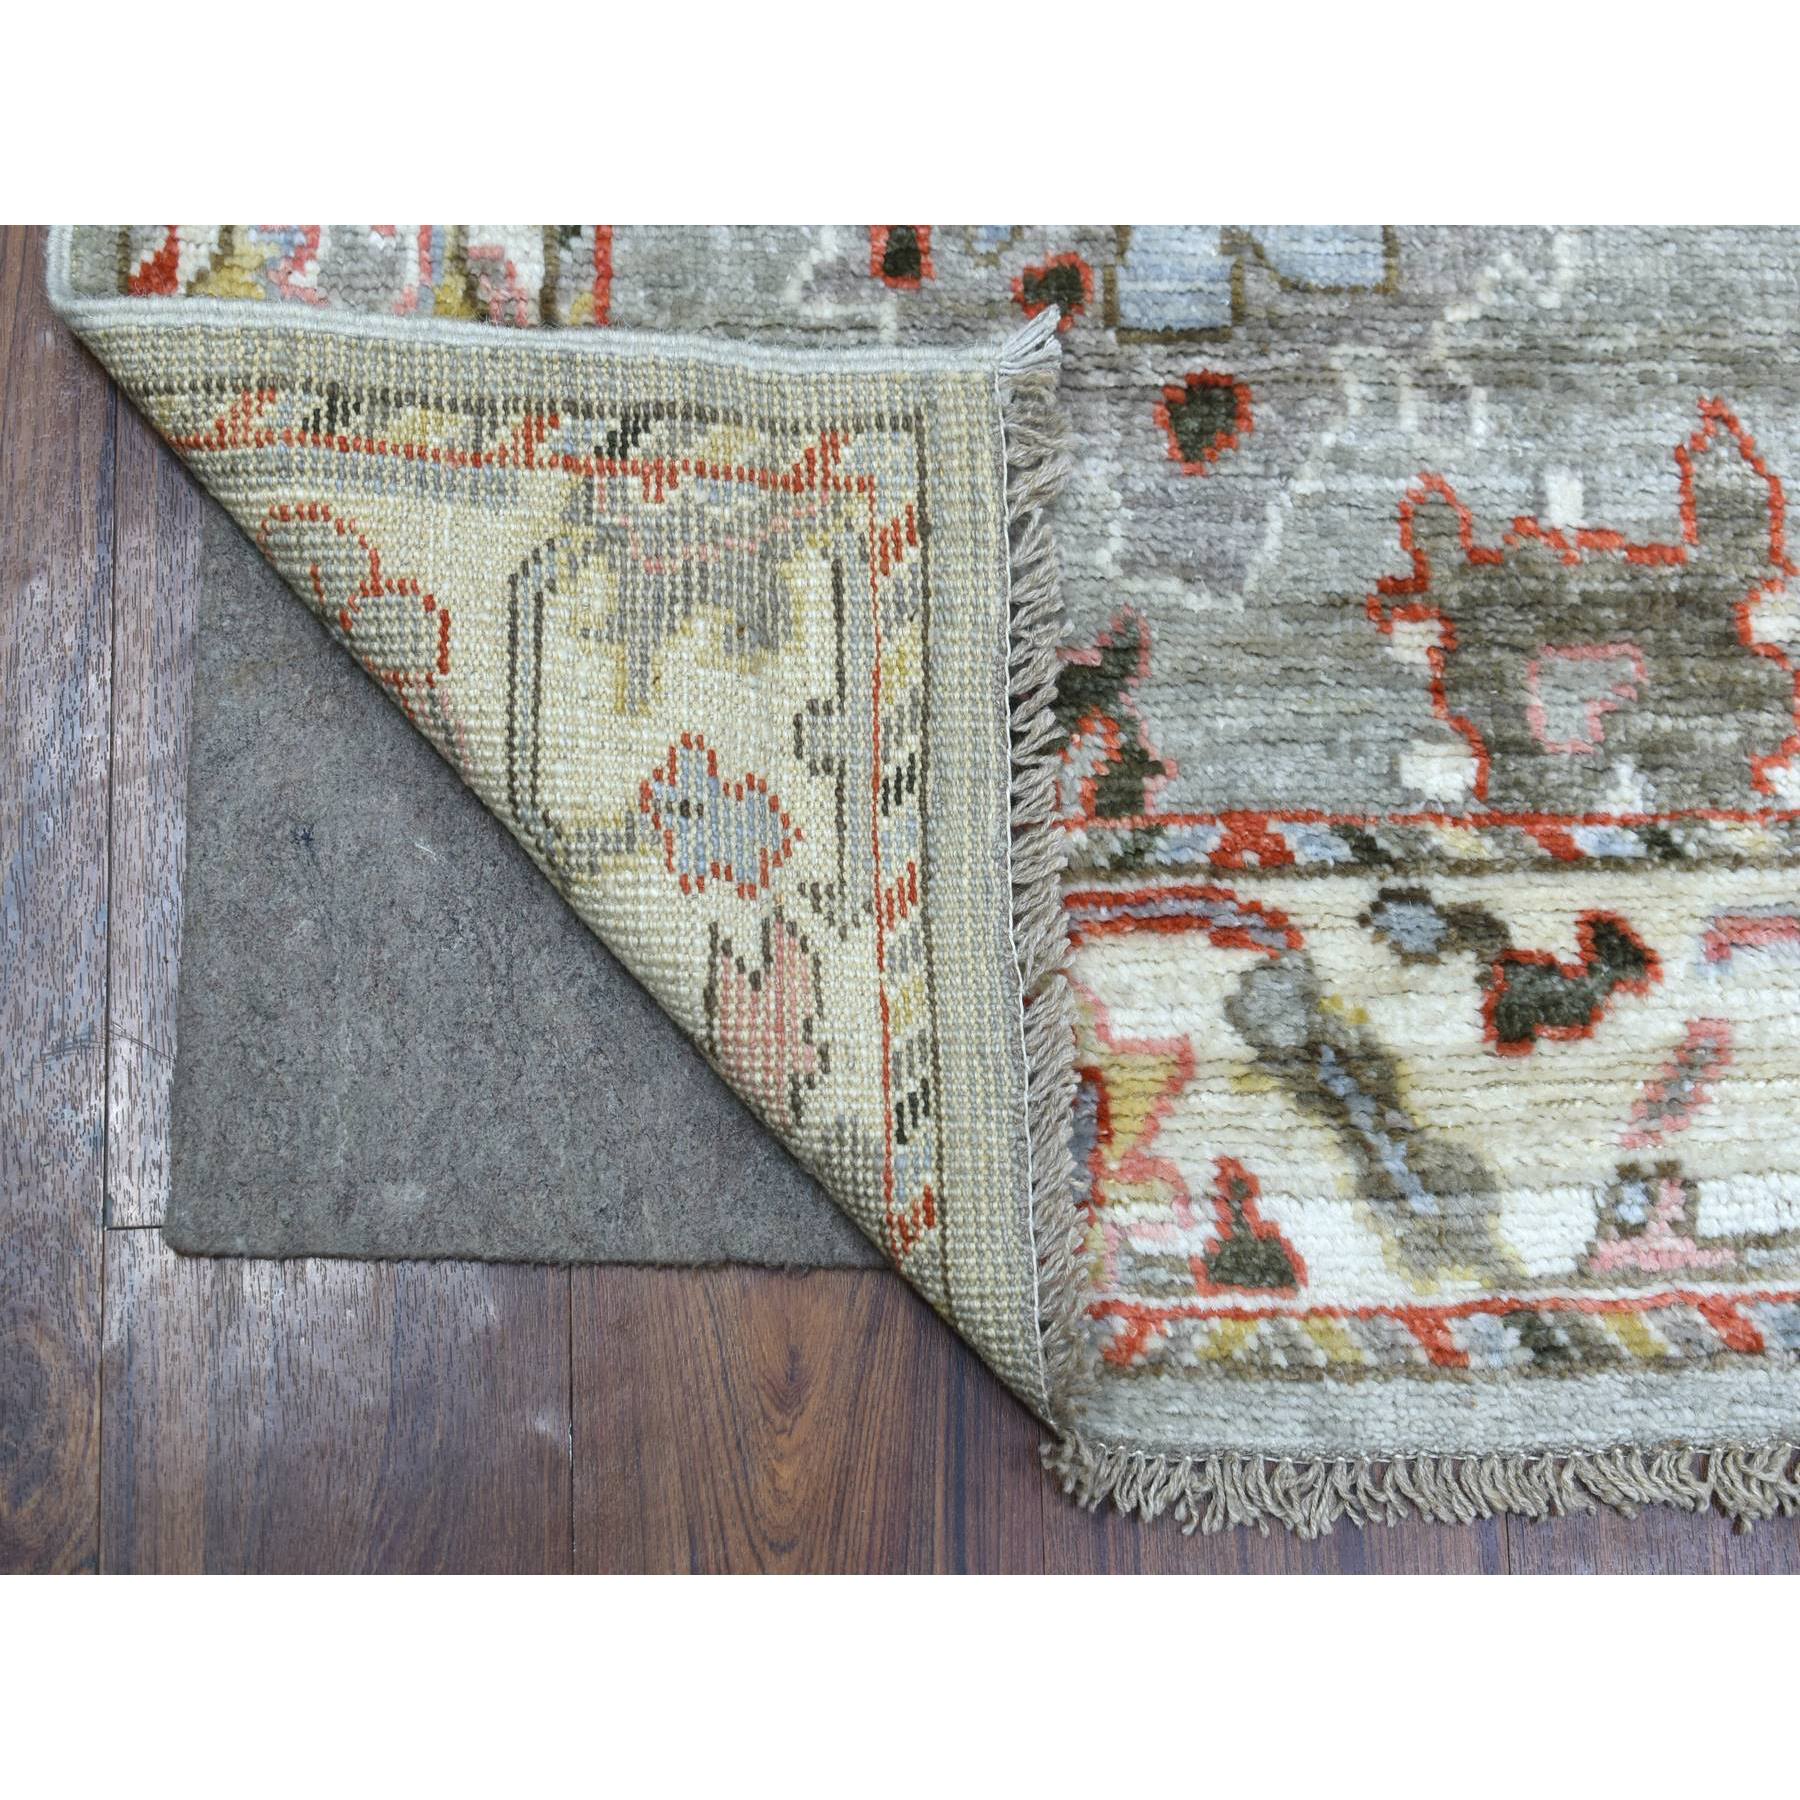 2'7"x9'8" Hand Woven Gray Afghan Angora Oushak with Bold Color Floral Pattern Pure Wool Oriental Rug 